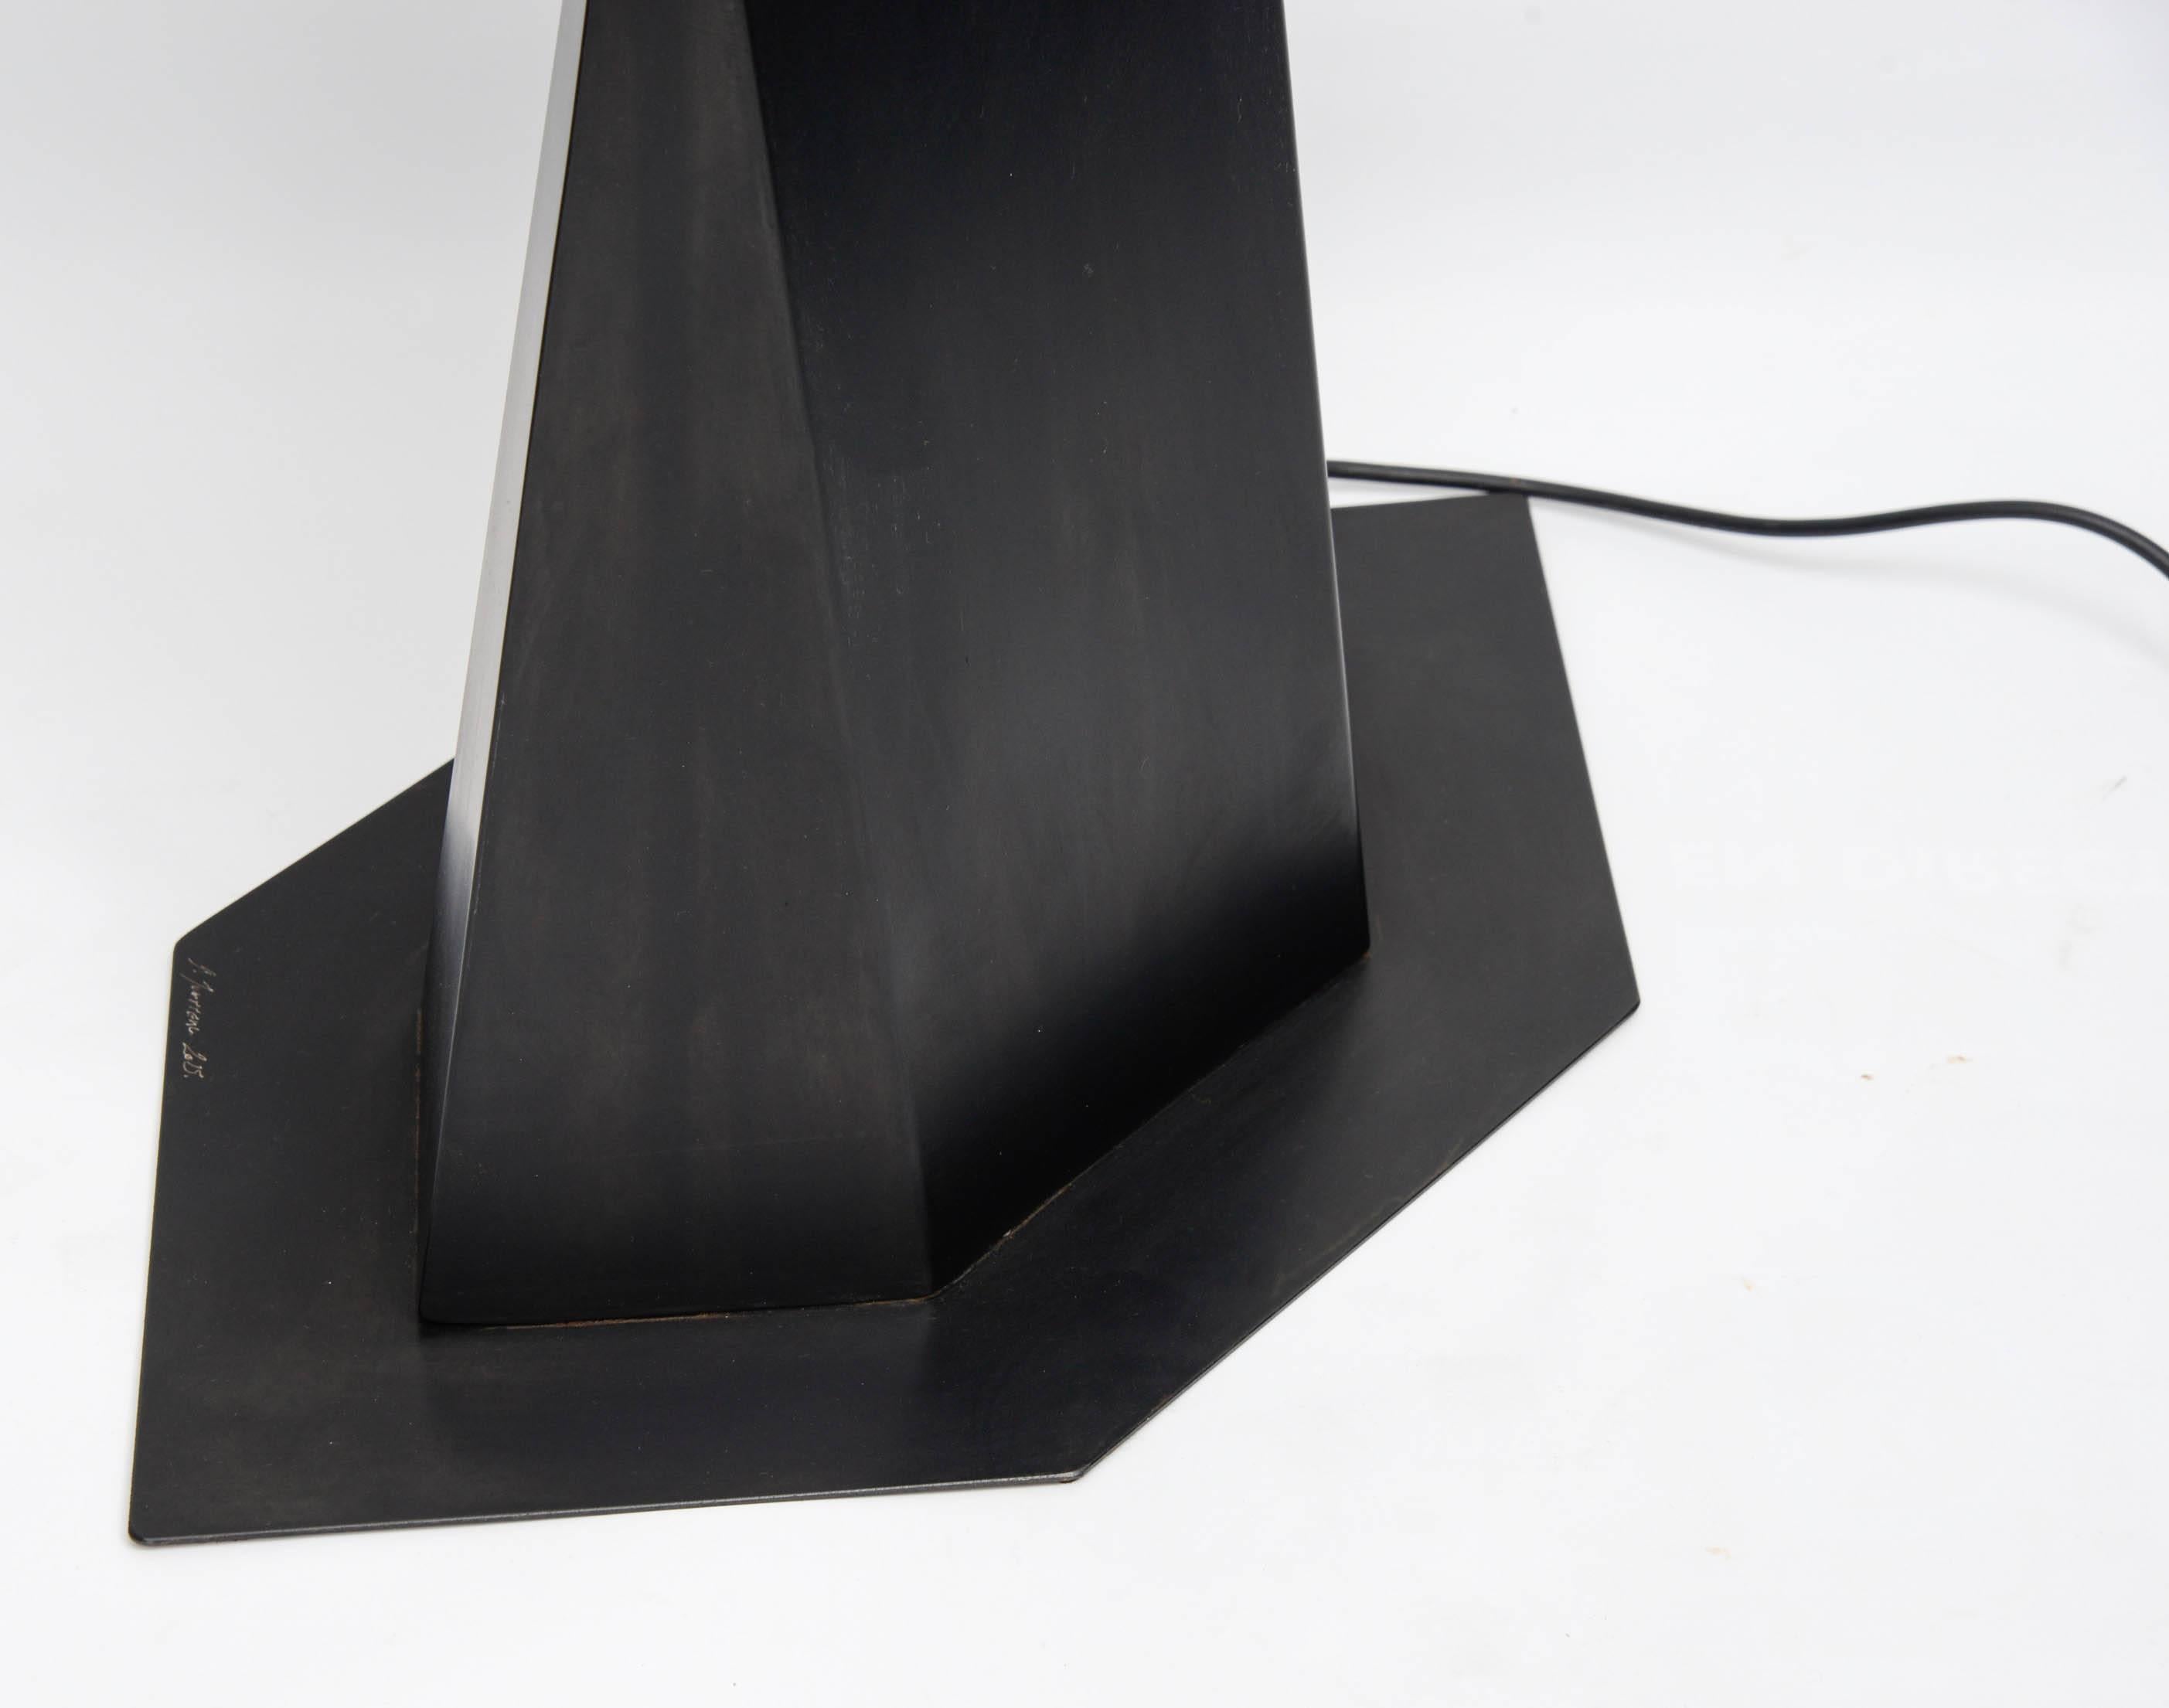 Contemporary Pair of Floor Lamps TOTEM by Stephane Ducatteau